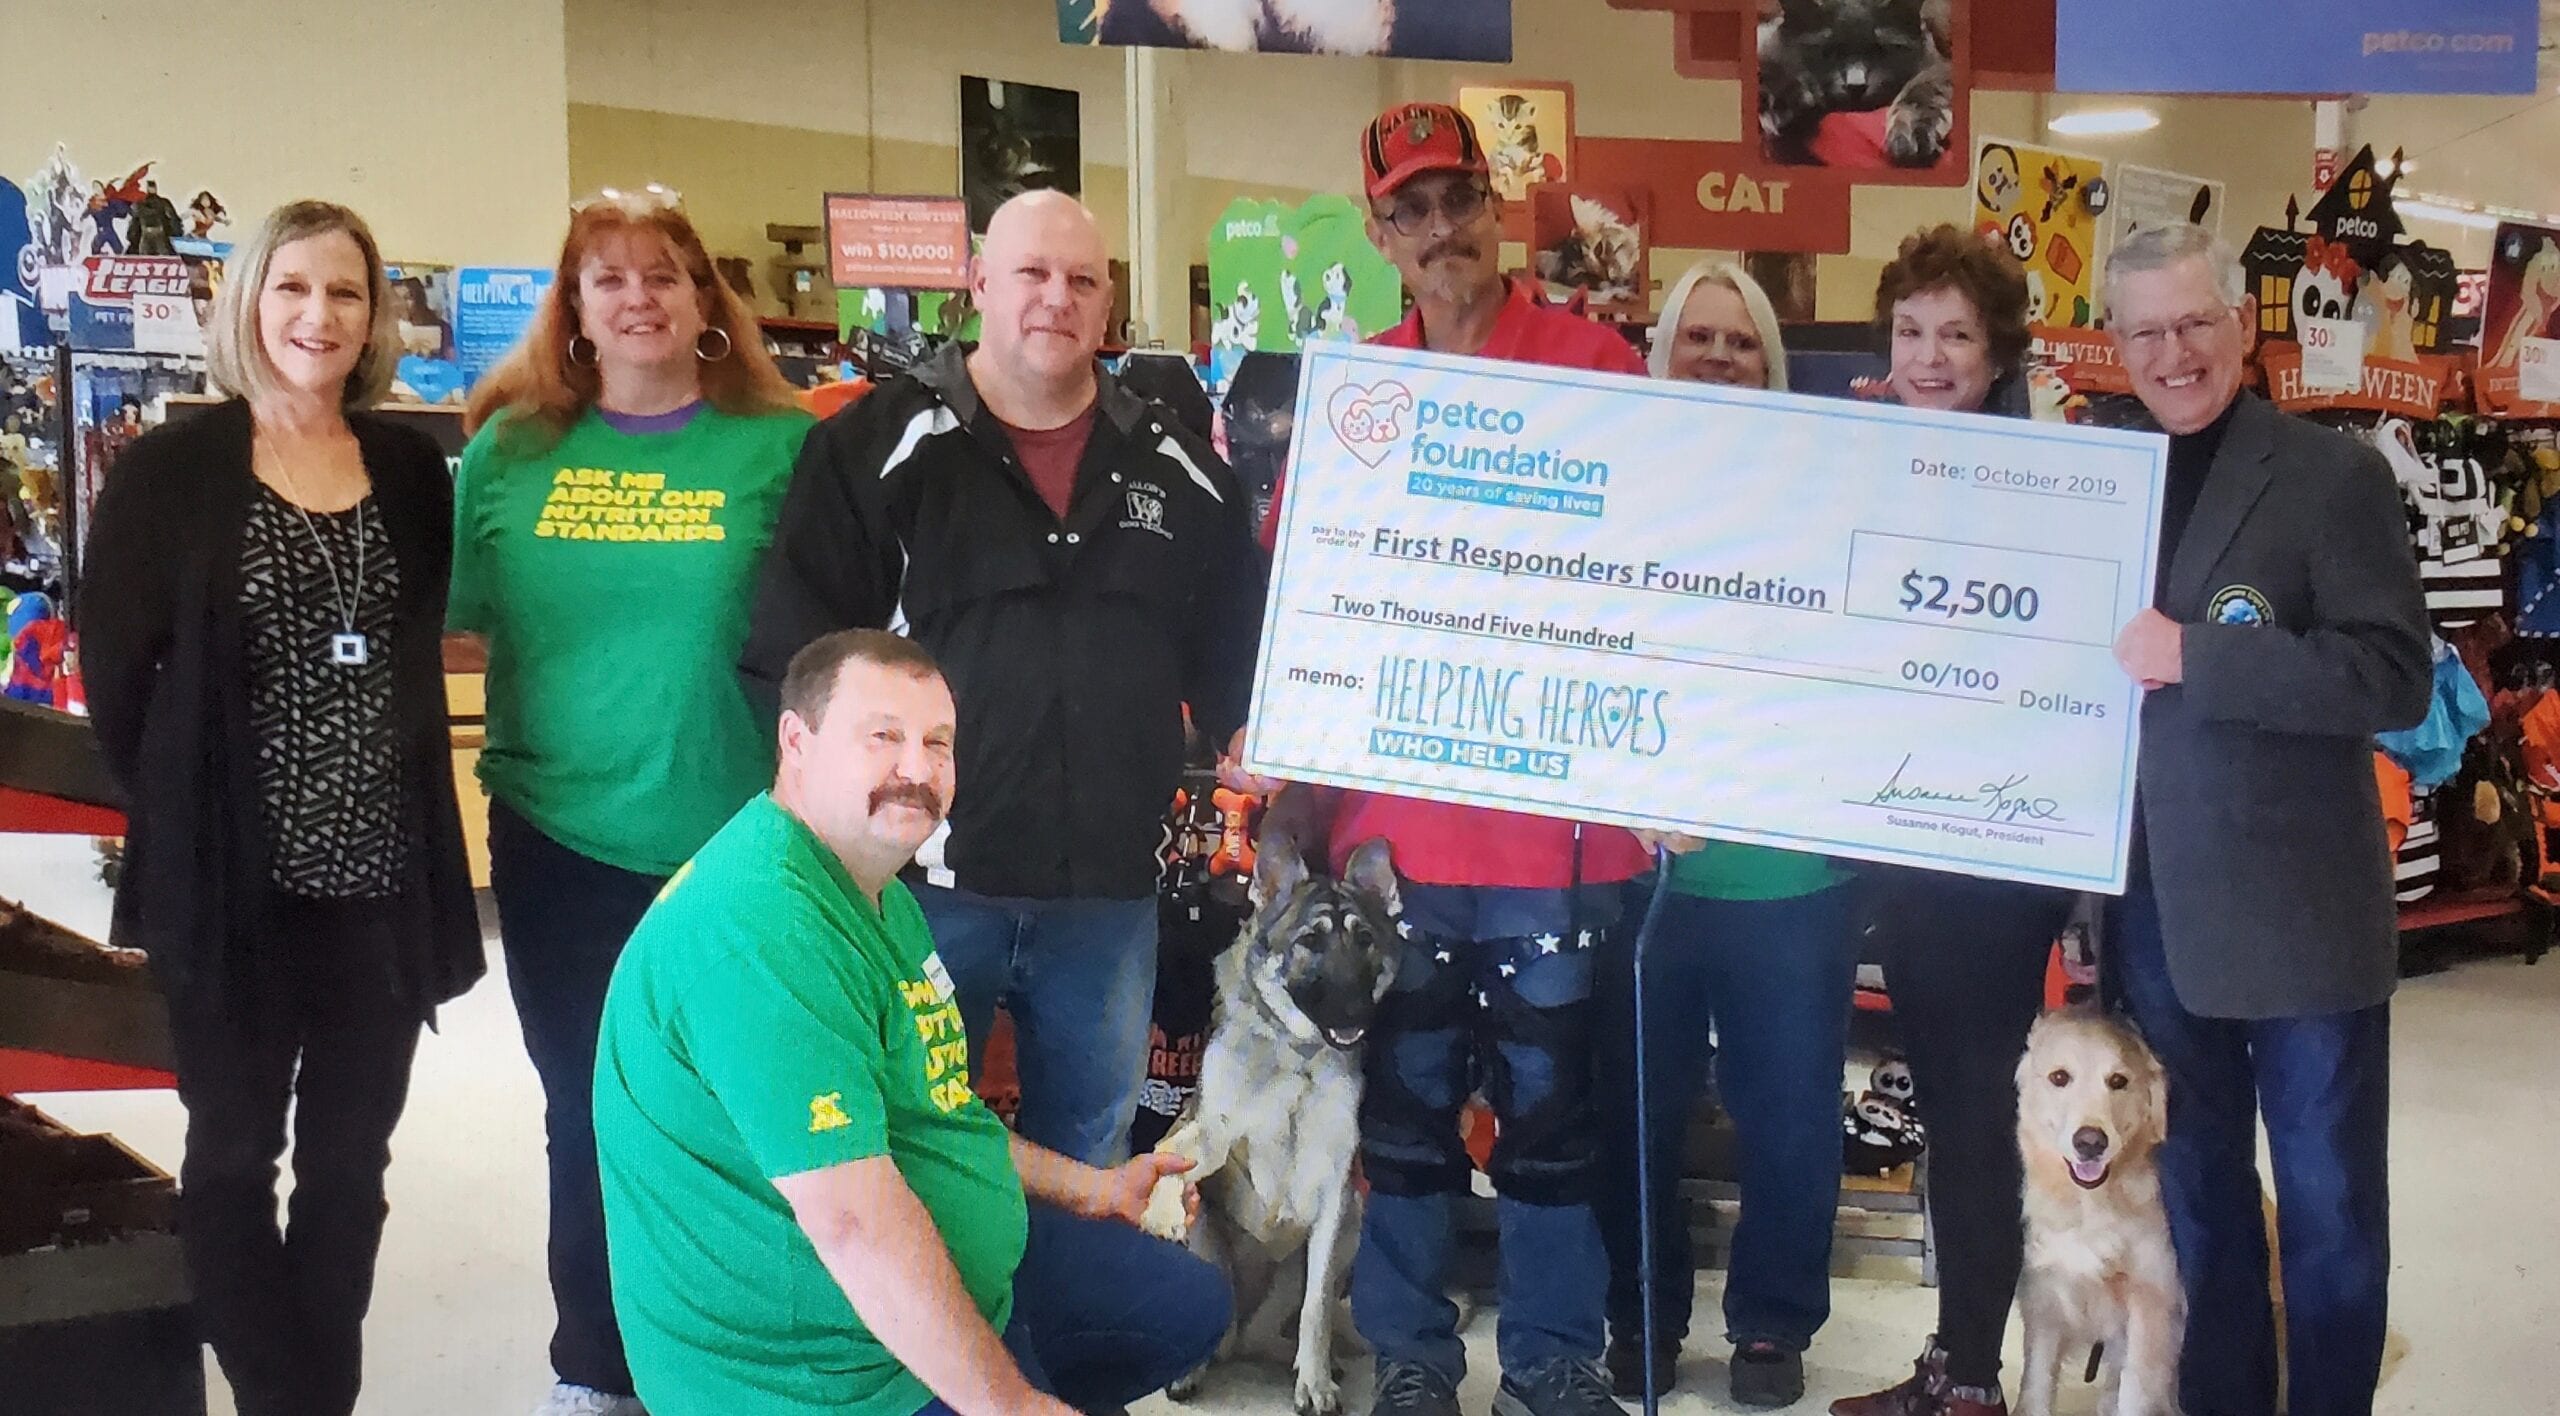 JAVELAN receives a Helping Heroes Grant from the Petco Foundation